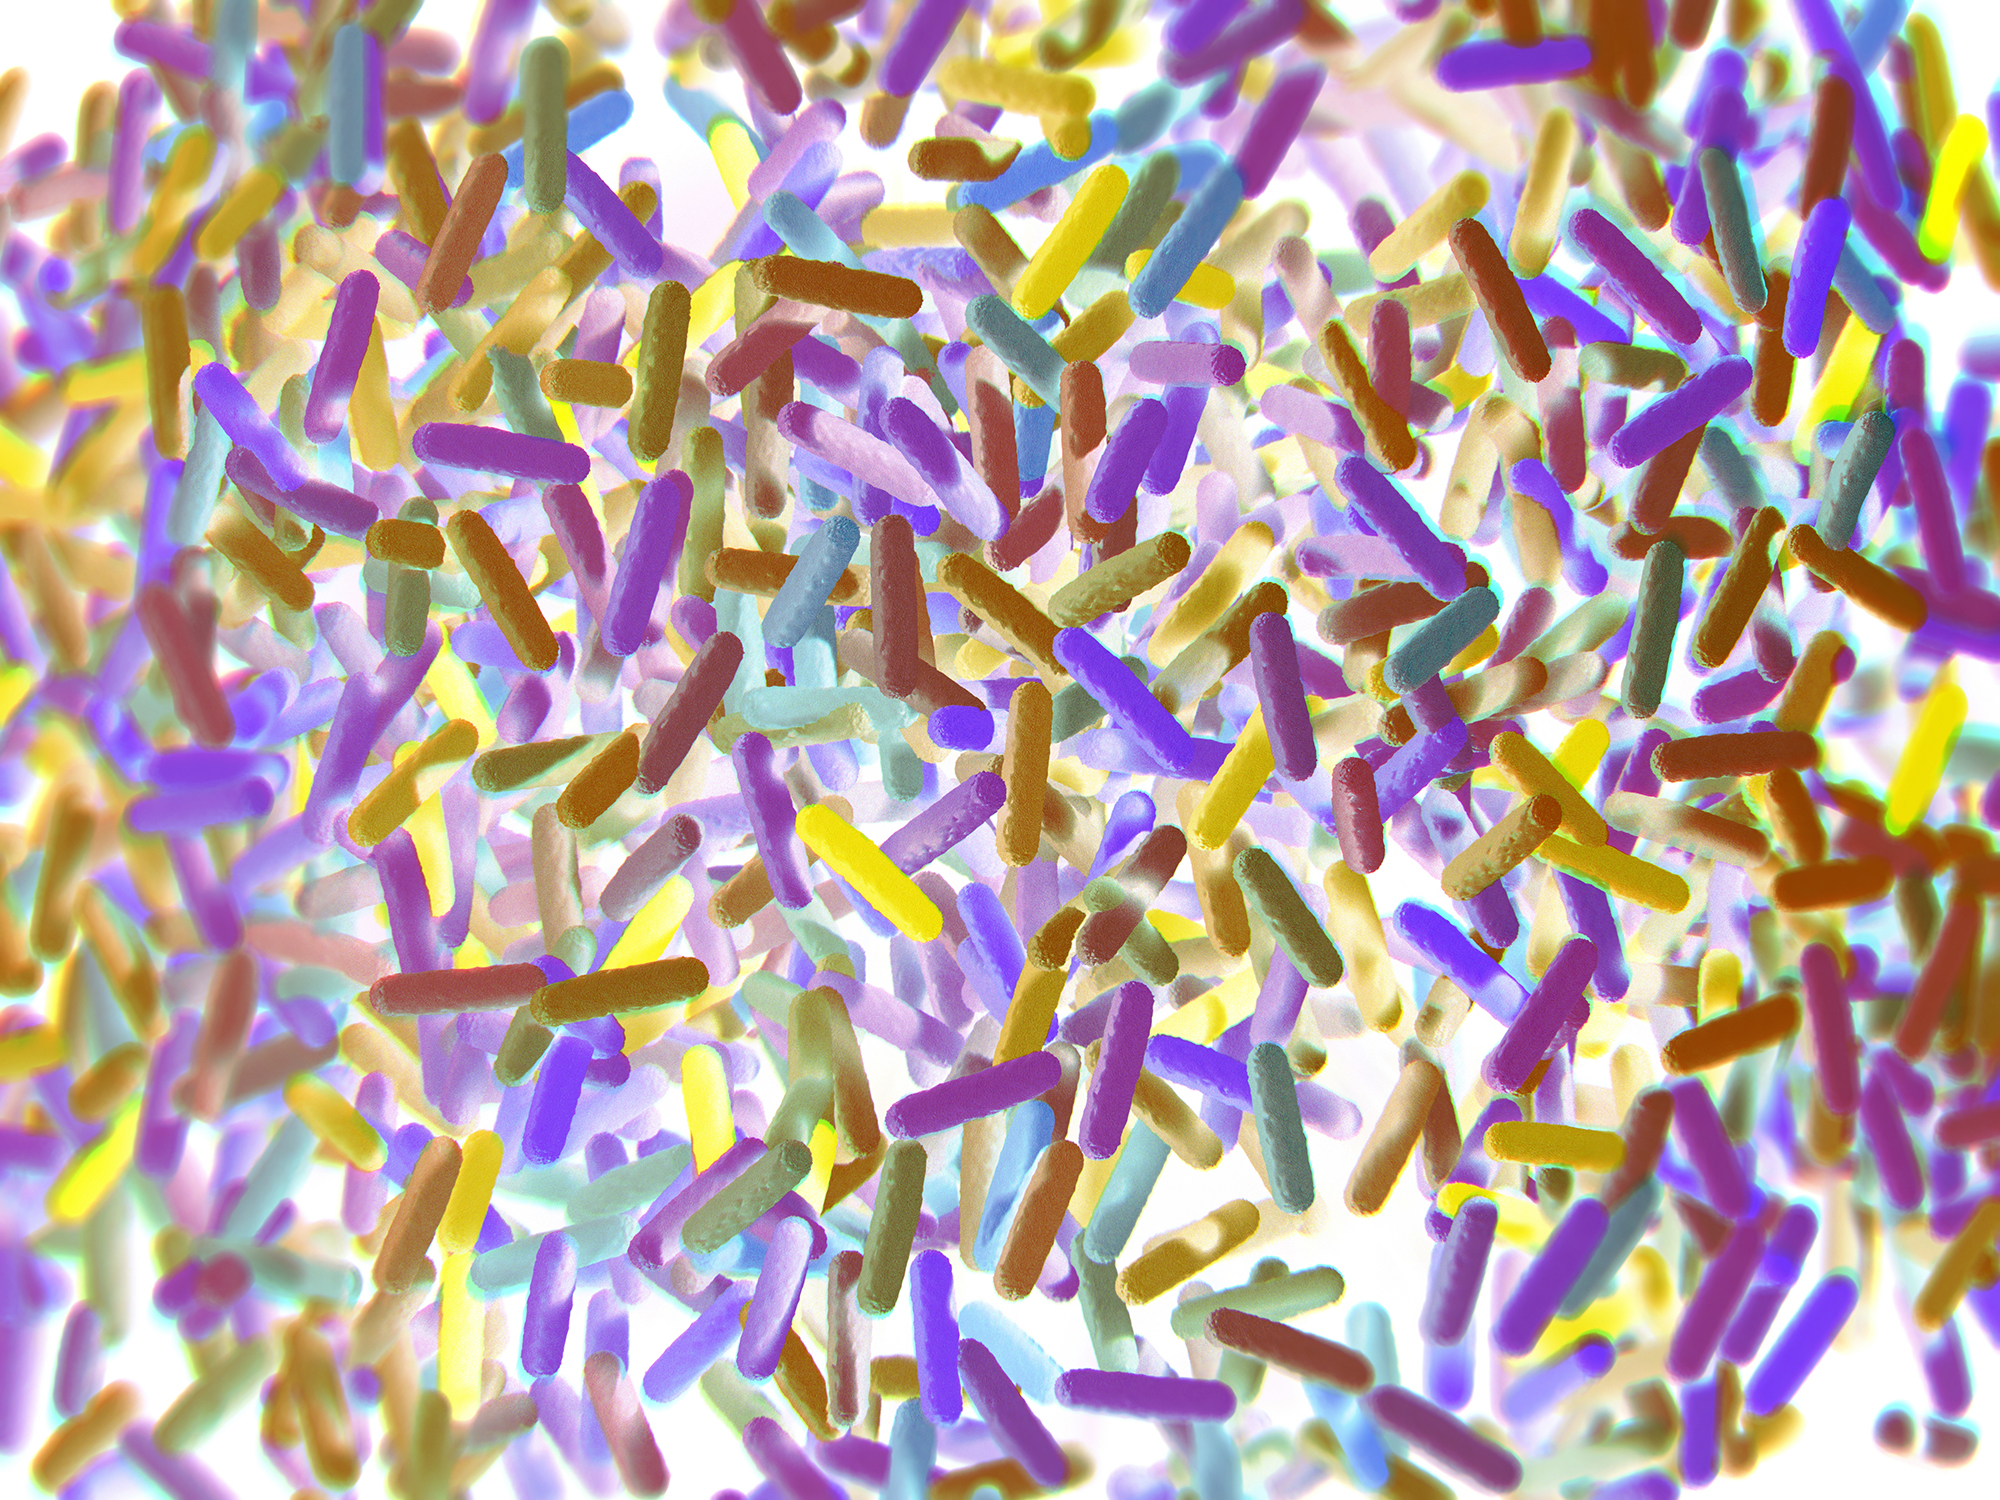 3D illustration of gut bacteria microbiome